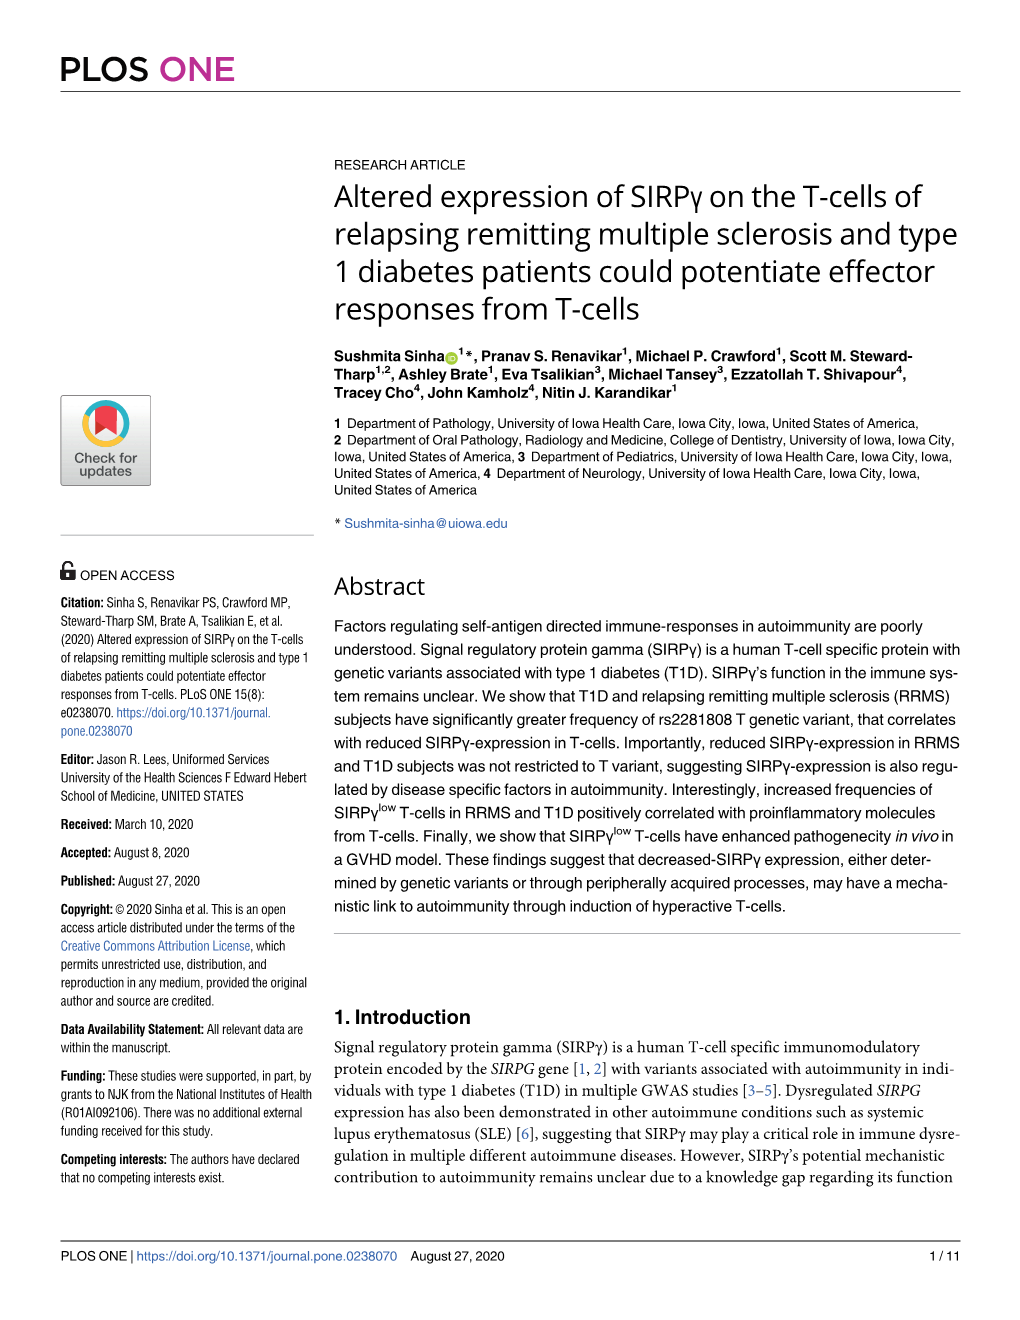 Altered Expression of Sirpγ on the T-Cells of Relapsing Remitting Multiple Sclerosis and Type 1 Diabetes Patients Could Potentiate Effector Responses from T-Cells